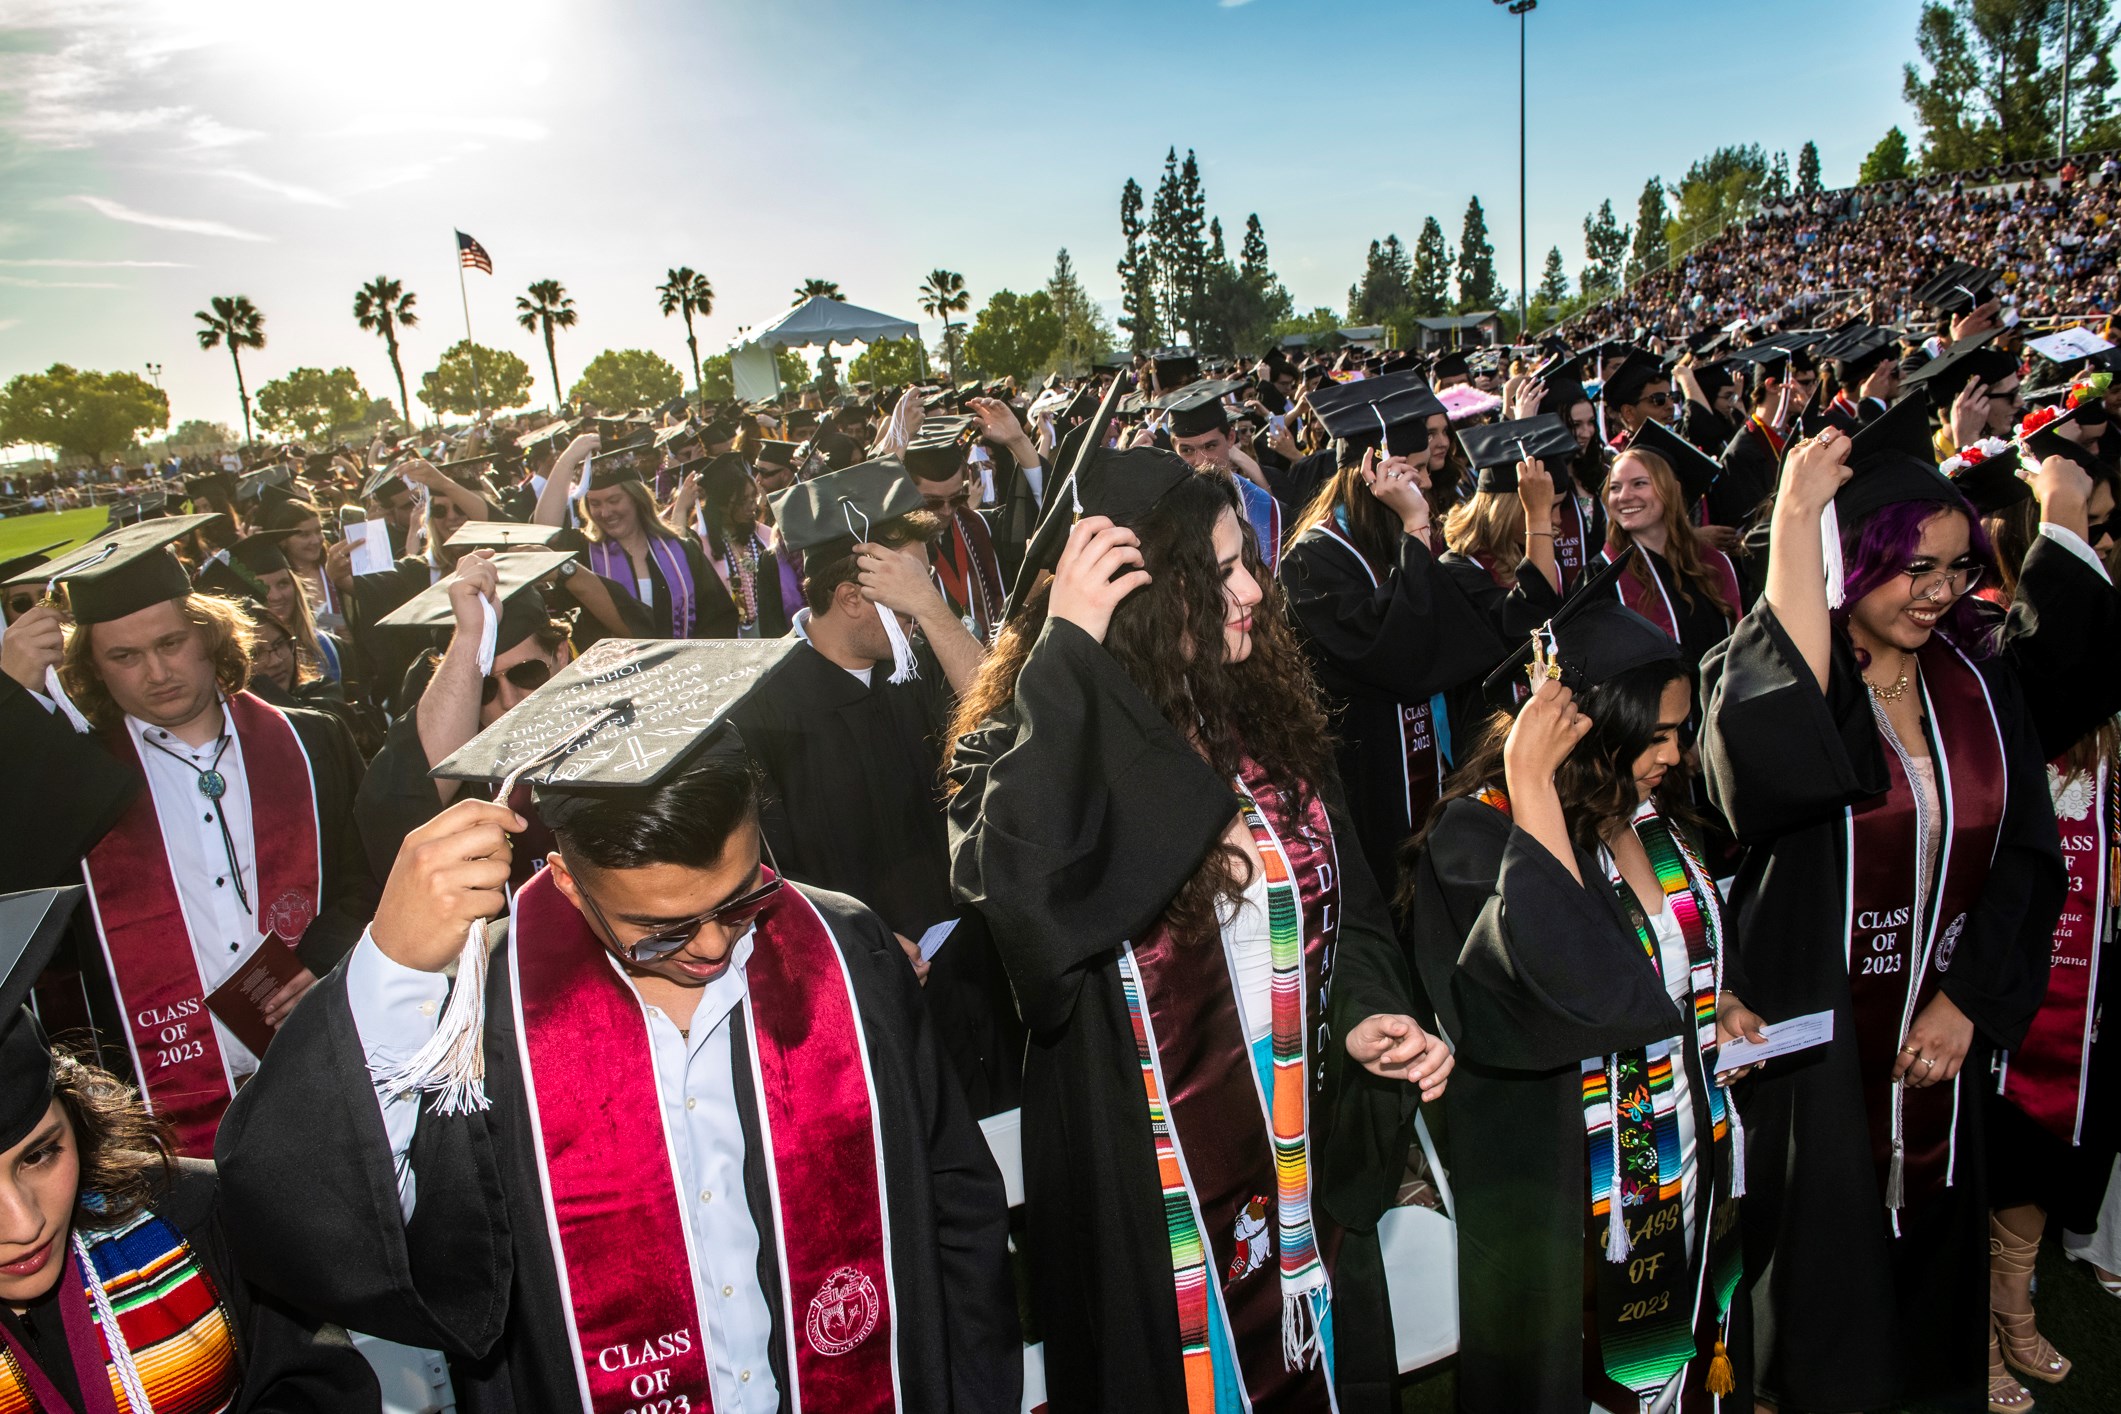 Students celebrate their hard work during Commencement. They prepare to move their tassel from one side to the other, indicating the earning of their diploma. 